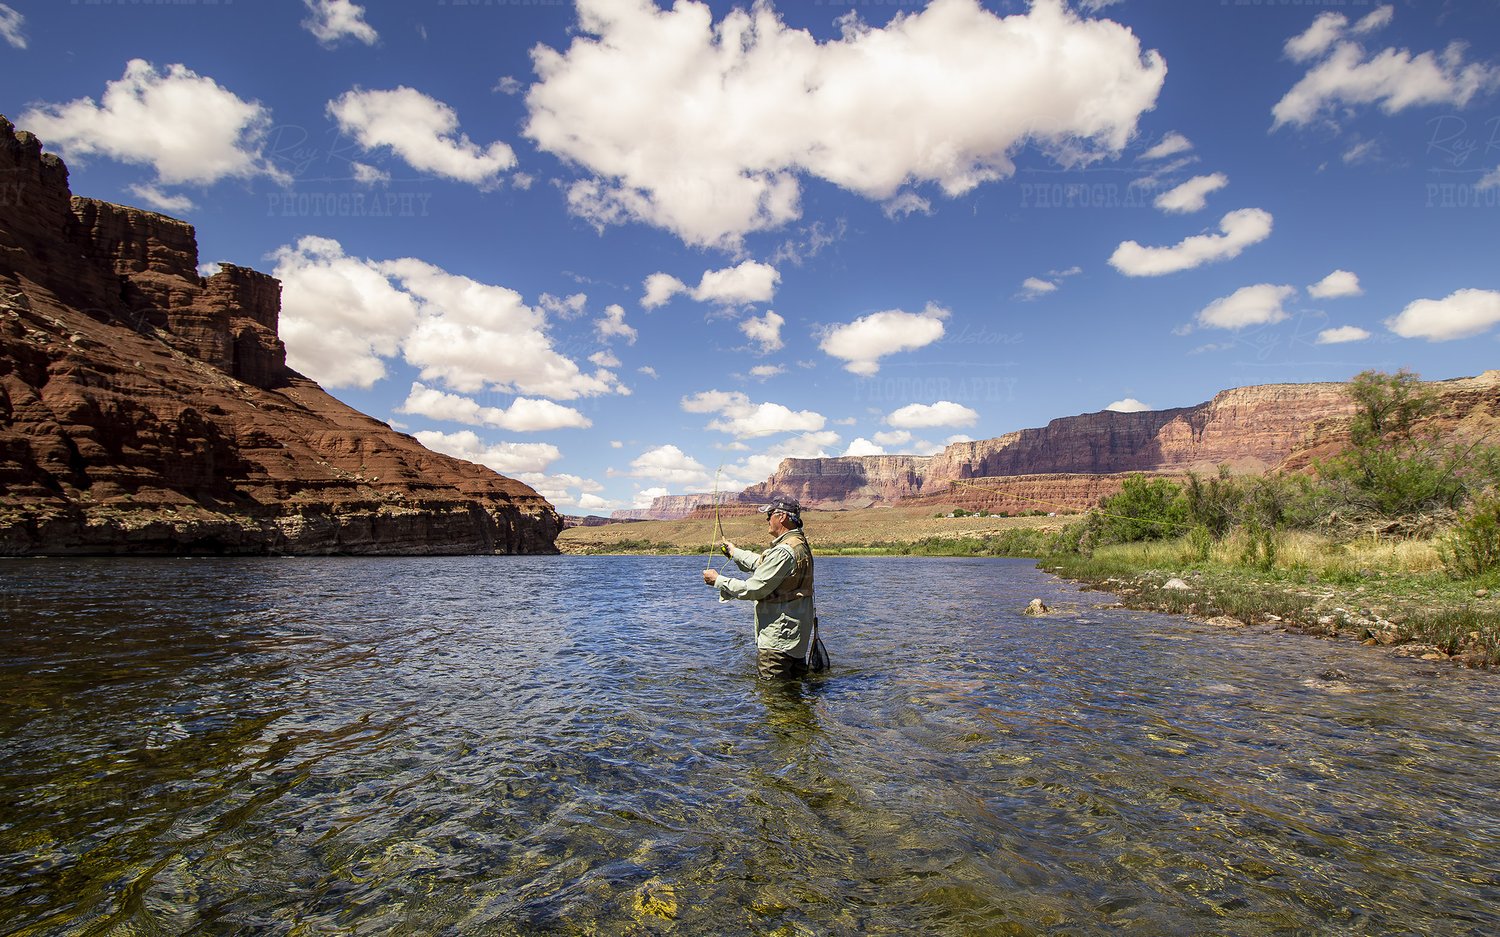 Lone Man Fly Fishing On The Colorado River, Lees Ferry, AZ